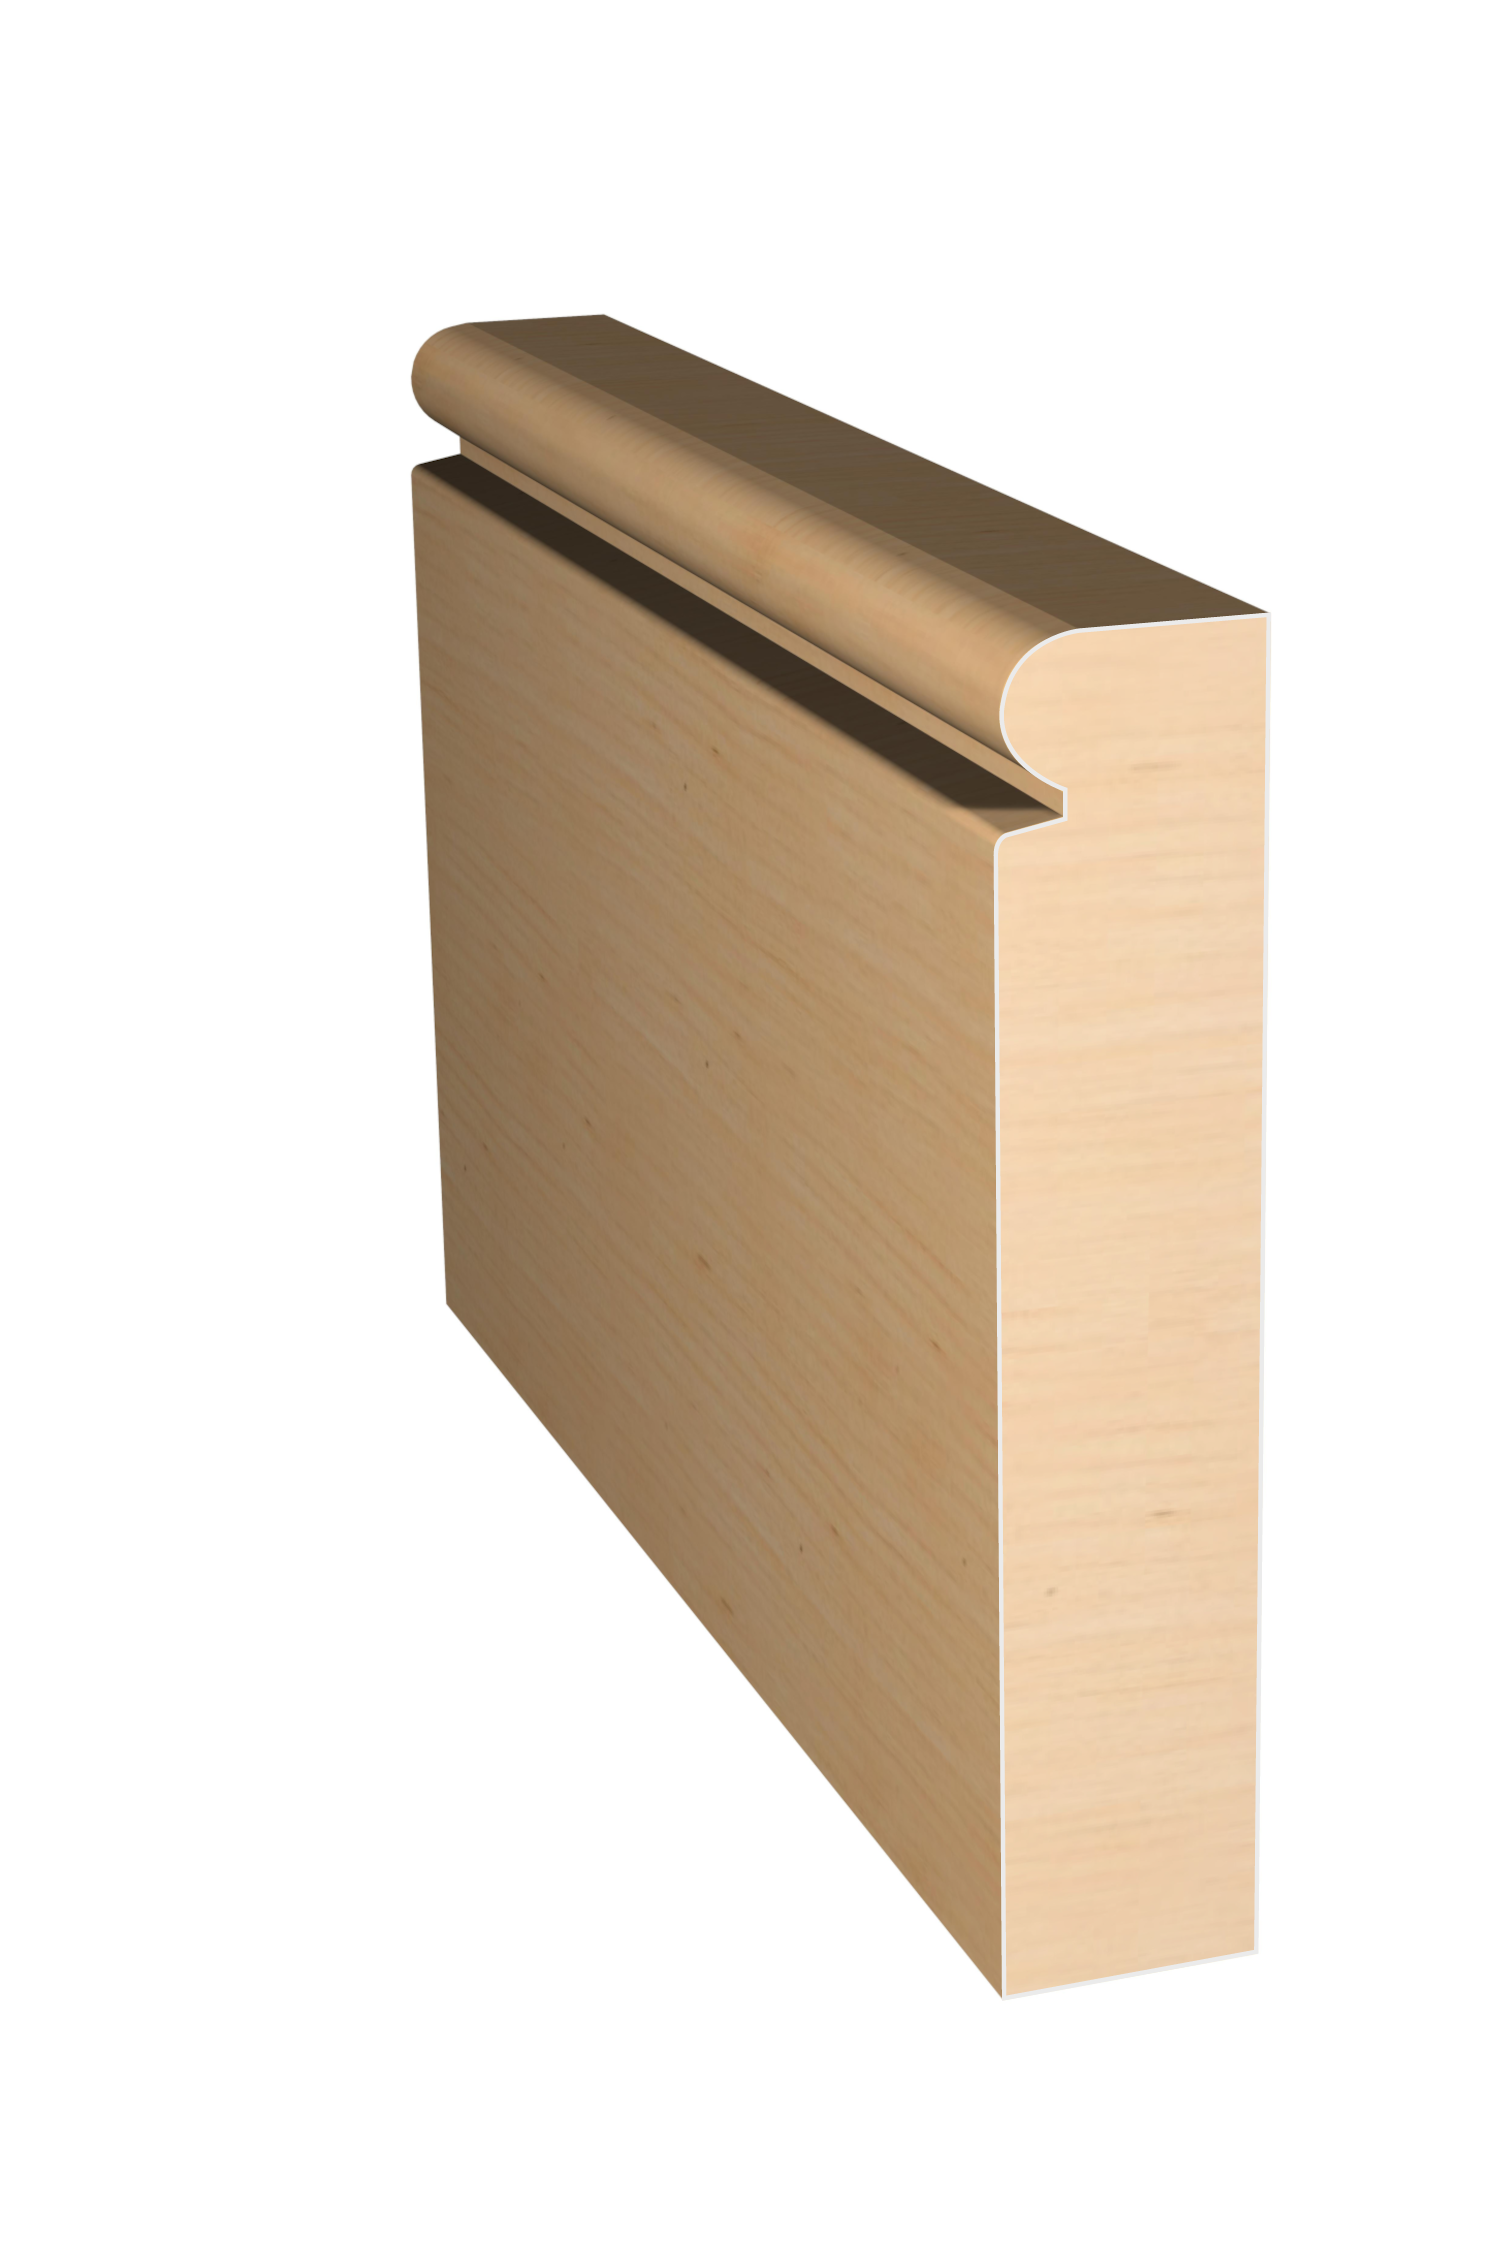 Three dimensional rendering of custom casing wood molding CAPL33412 made by Public Lumber Company in Detroit.